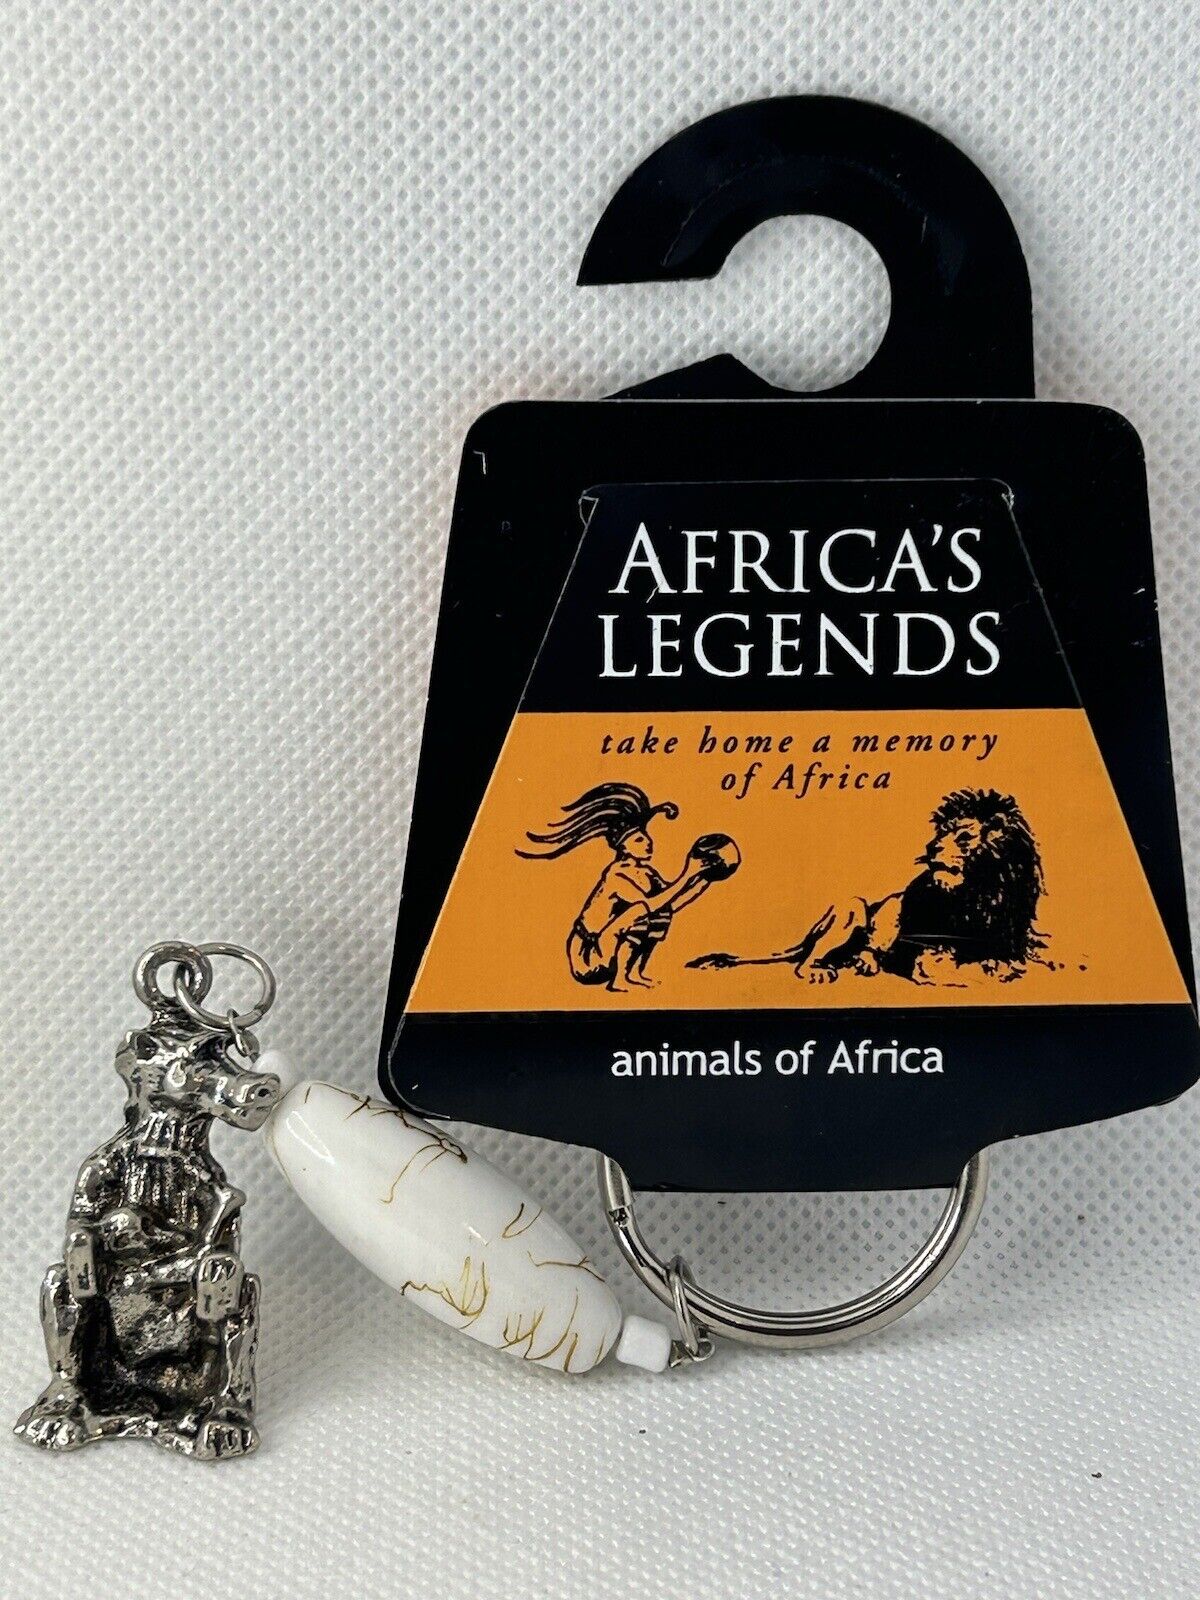 Africa’s Legends Keychain - Animals of Africa - Product Of Africa Authentic